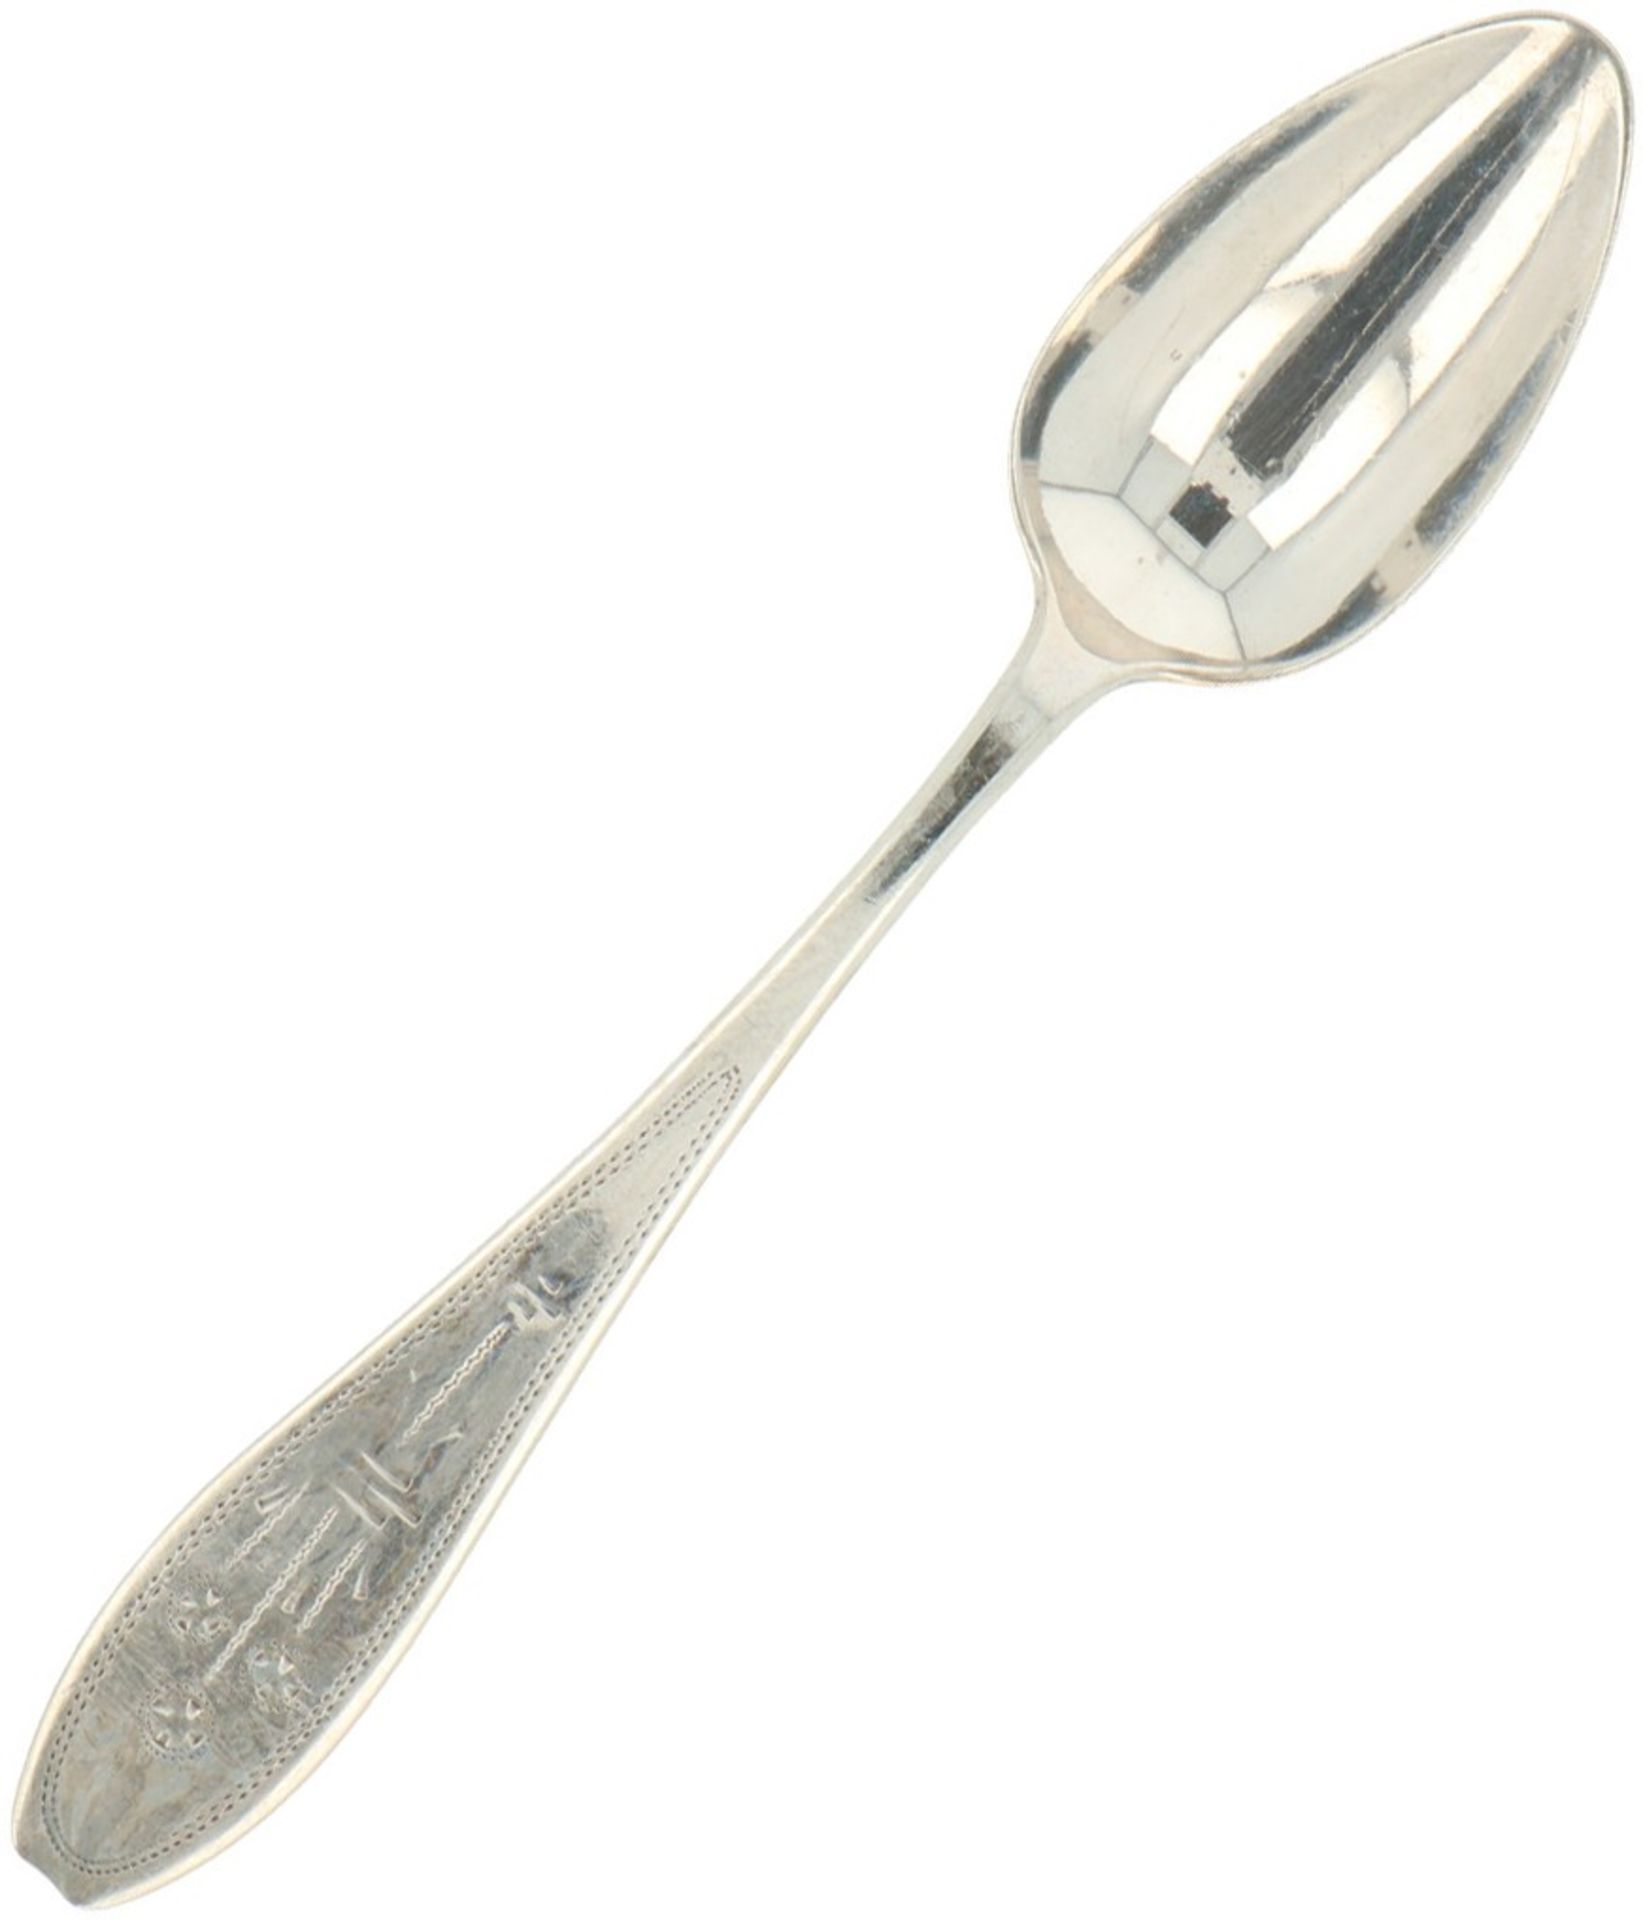 (6) piece set coffeespoons silver. - Image 2 of 4